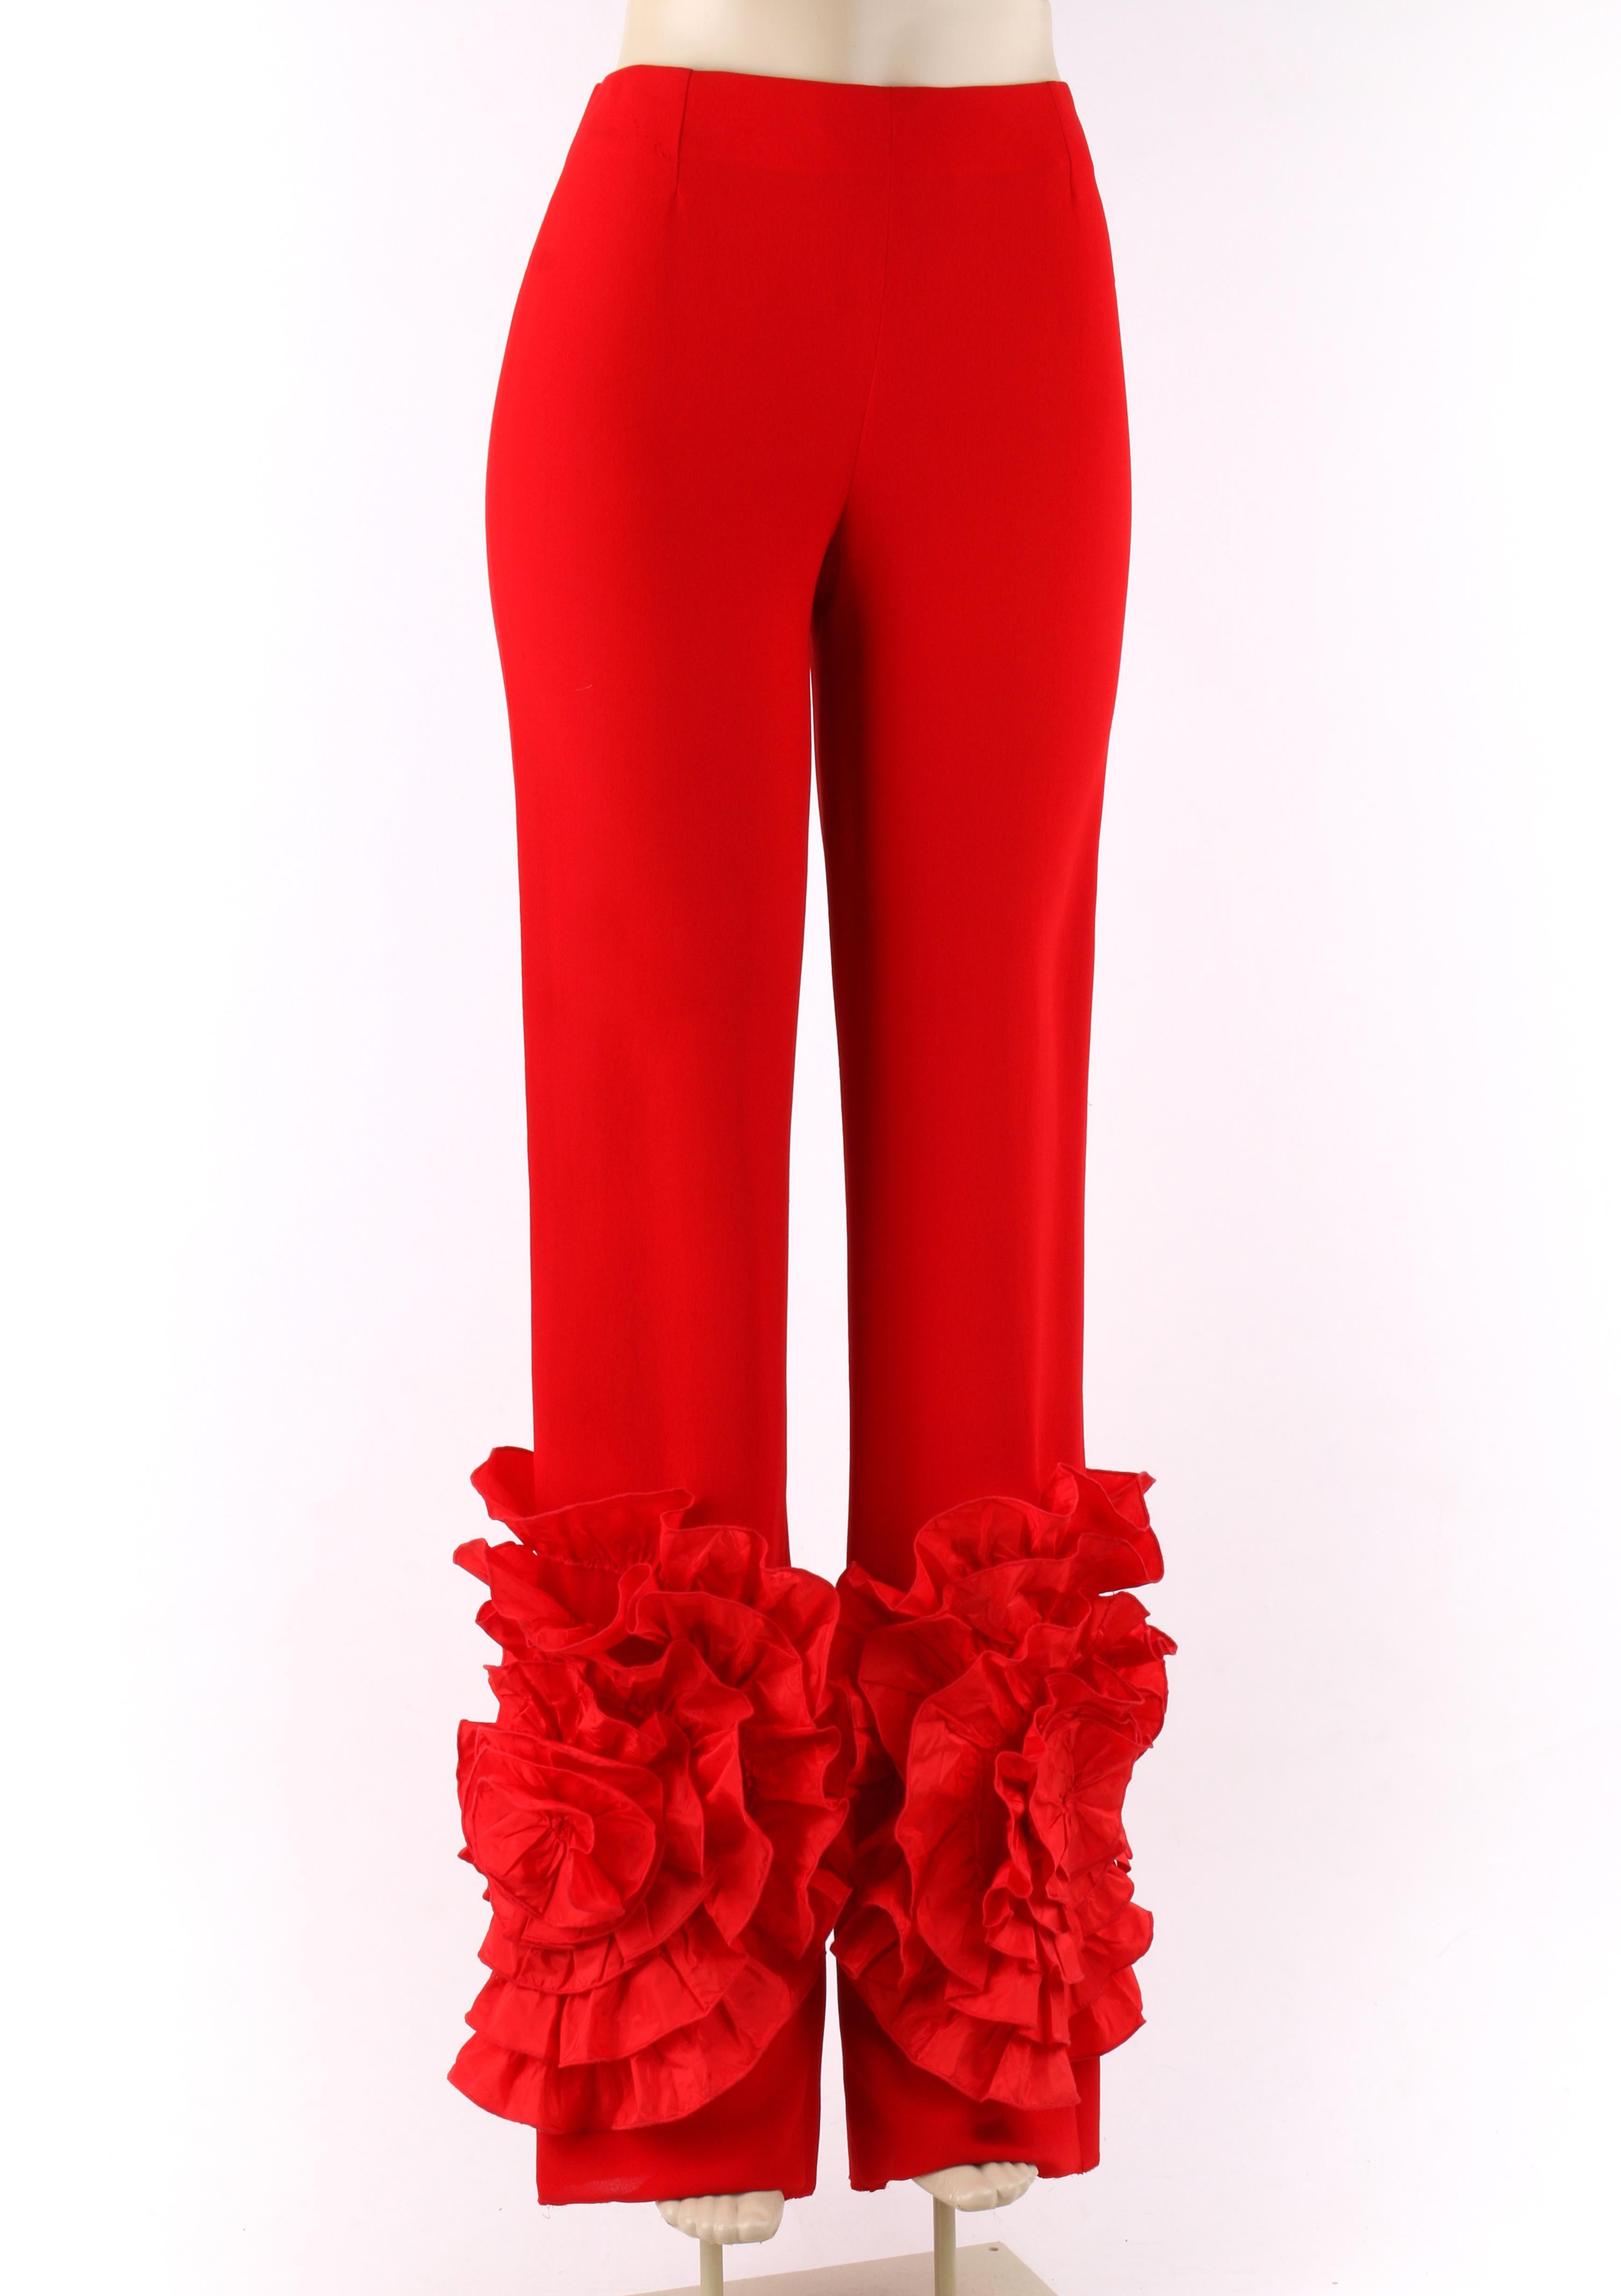 VALENTINO c.2000's Red Silk Flamenco Floral Ruffle Trouser Pants NWT
 
Estimated Retail: $2,550
 
Brand / Manufacturer: Valentino
Manufacturer Style Name:Trousers 
Color(s): Red 
Lined: No
Marked Fabric Content: 100% Silk 
Additional Details /